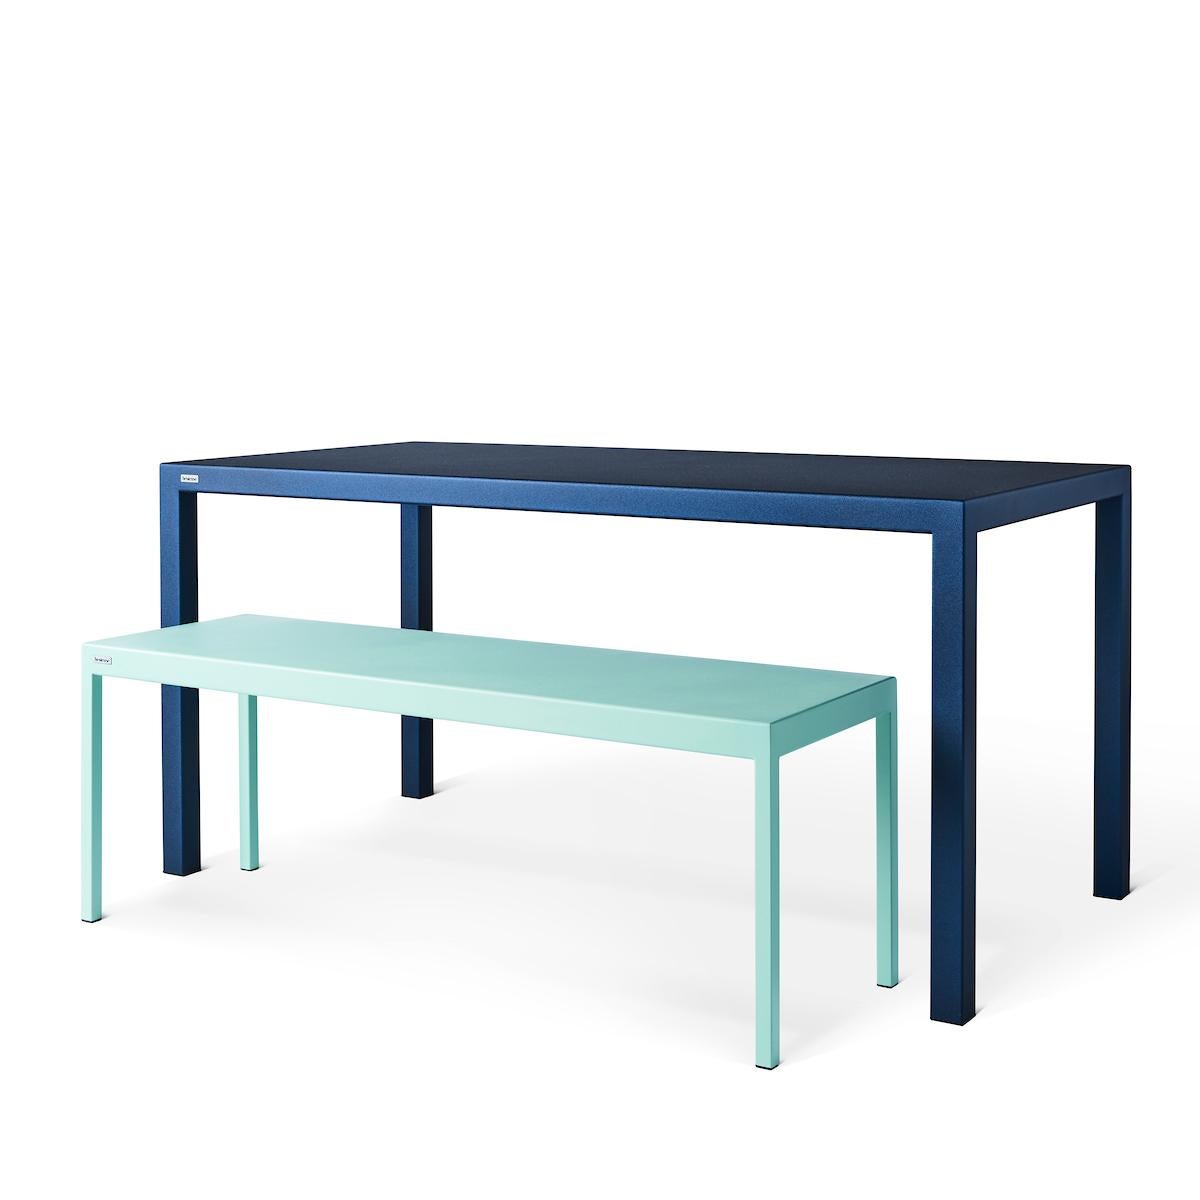 Blue Powder Coated Steel Desk In New Condition For Sale In New York, NY